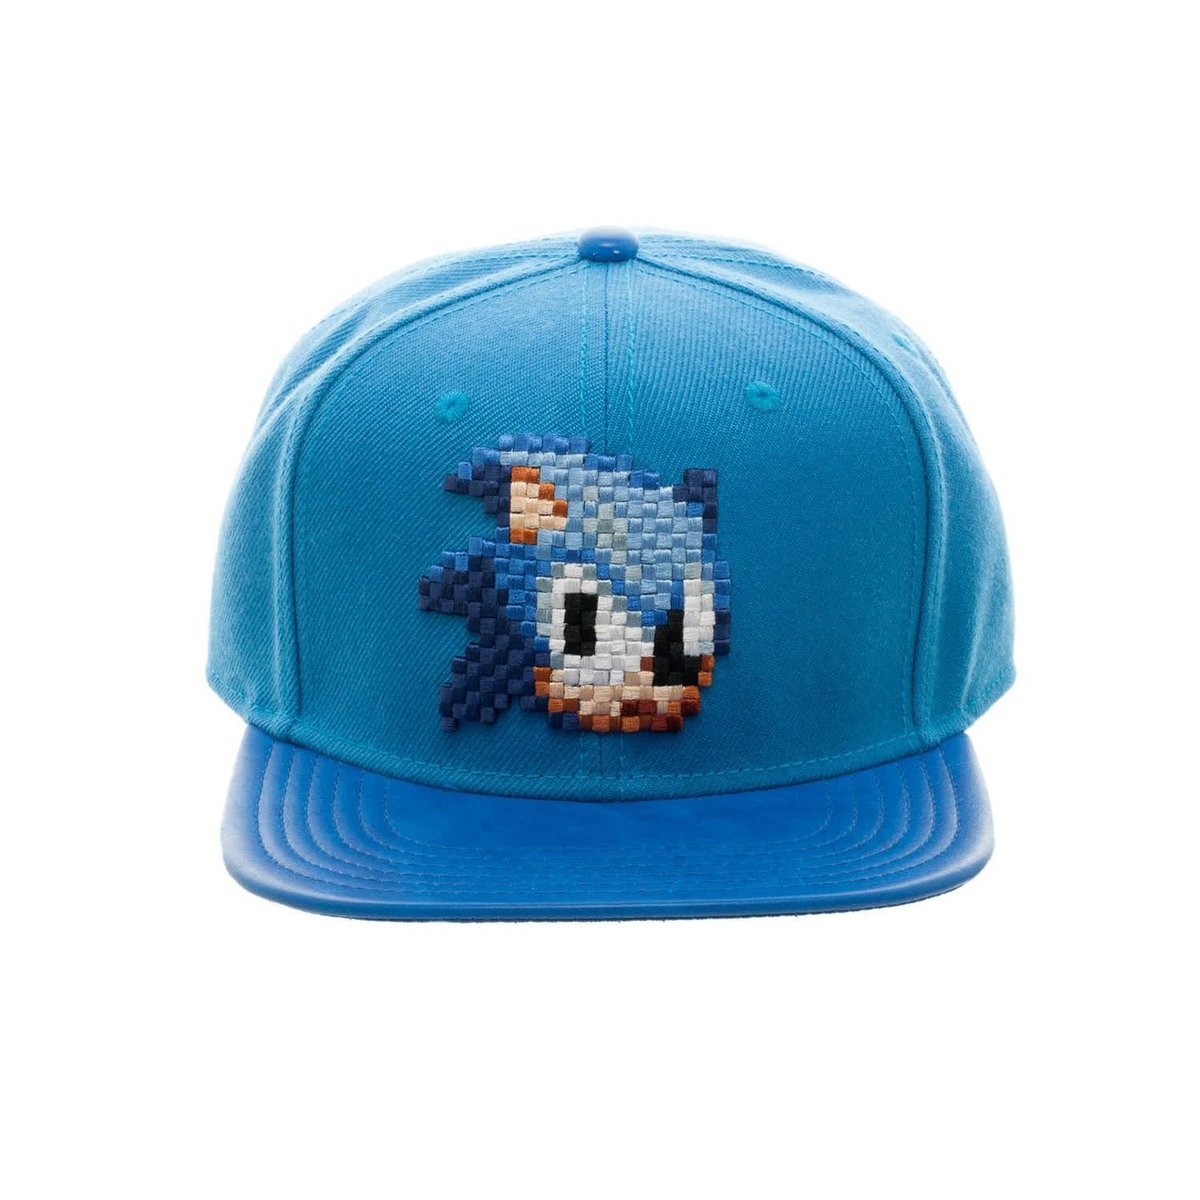 Grab this Bioworld Licensed Sonic The Hedgehog “Don’t Blink” Pixelated Digital Blue PU Leather Brim Snapback Hat! Go get it now at https://t.co/z5NW1ZCusG #bioworld #sonicthehedgehog #caps #hats #snapback #logo #embroidery #thecapguys #movie #tv #videogame #comicbook #comic https://t.co/dH8sizeJYr